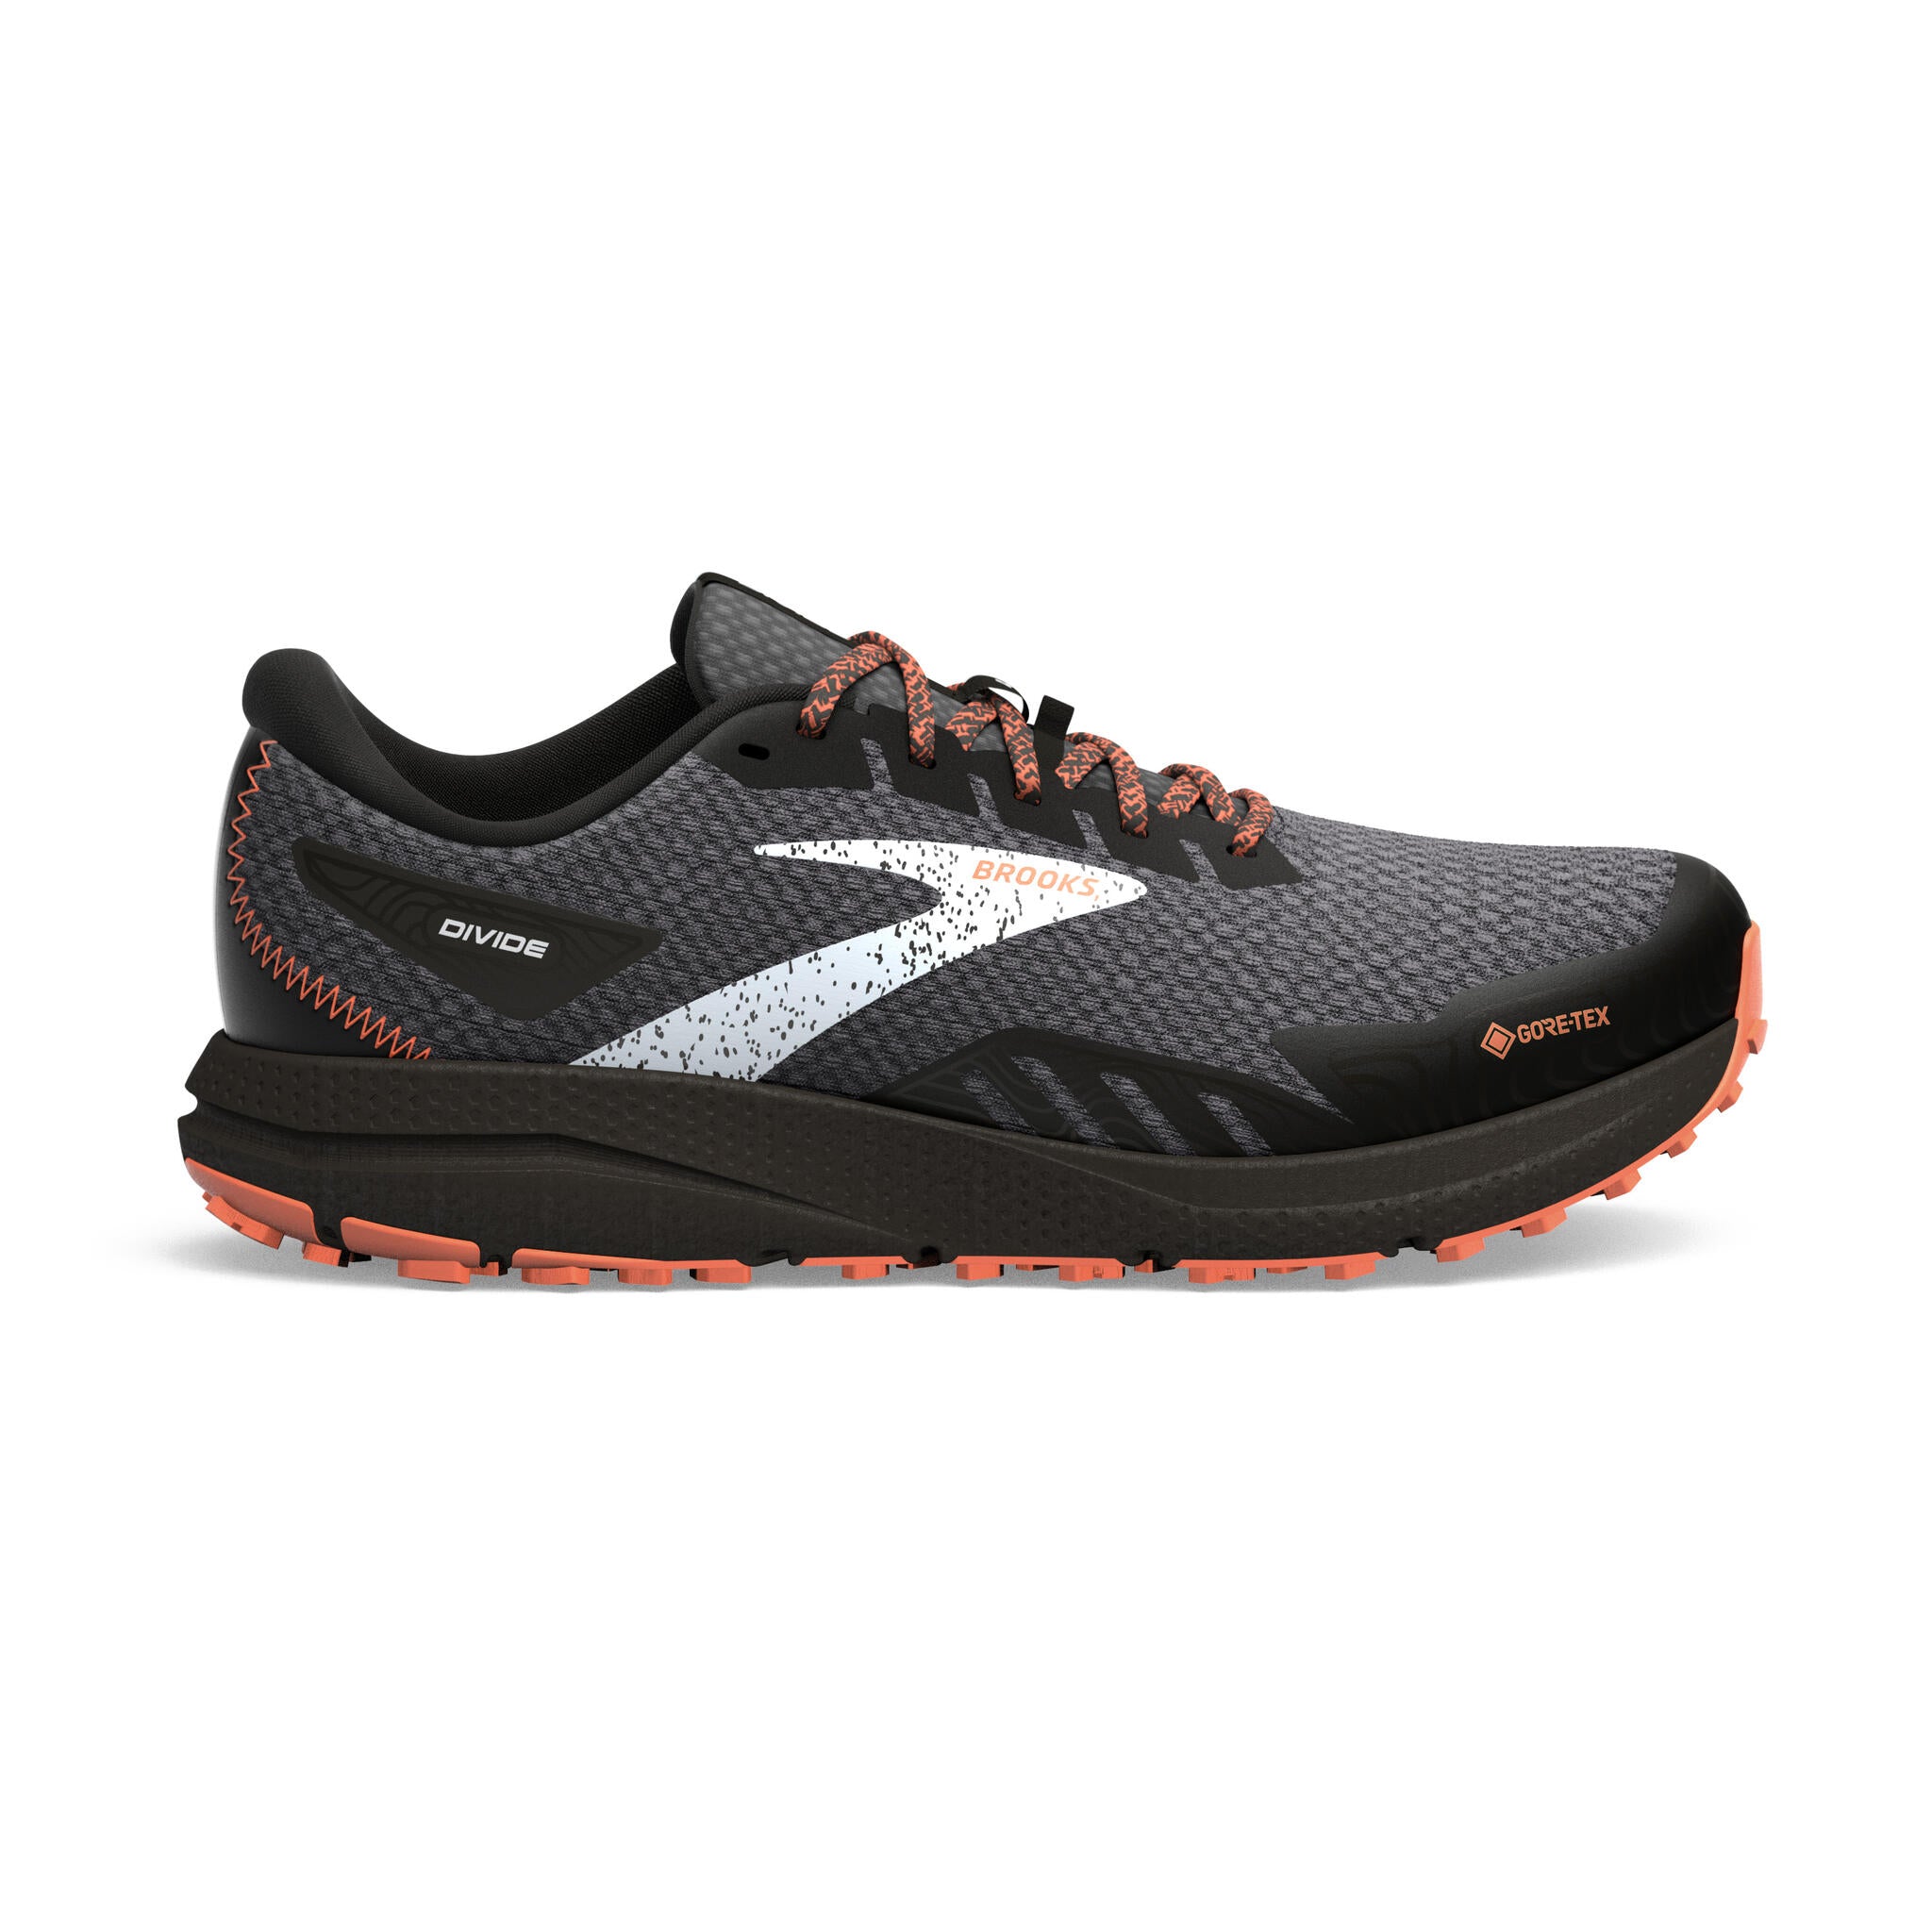 Brooks Divide 4 GTX Men's Running Shoes | Source for Sports